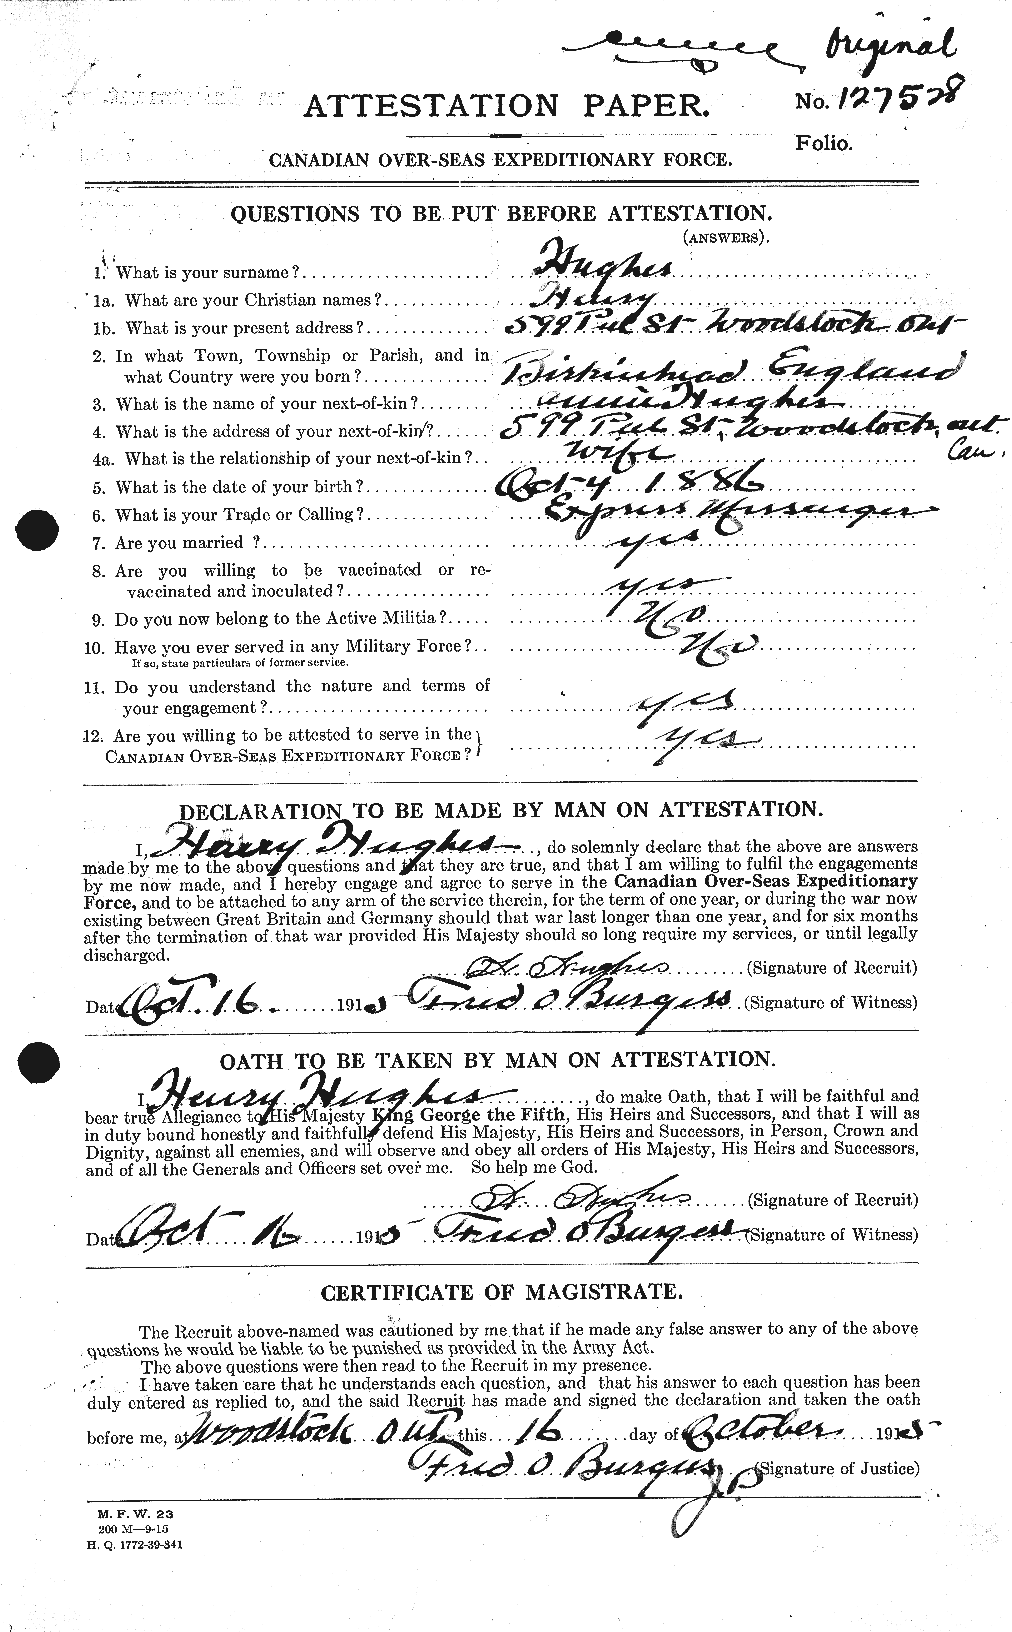 Personnel Records of the First World War - CEF 403862a